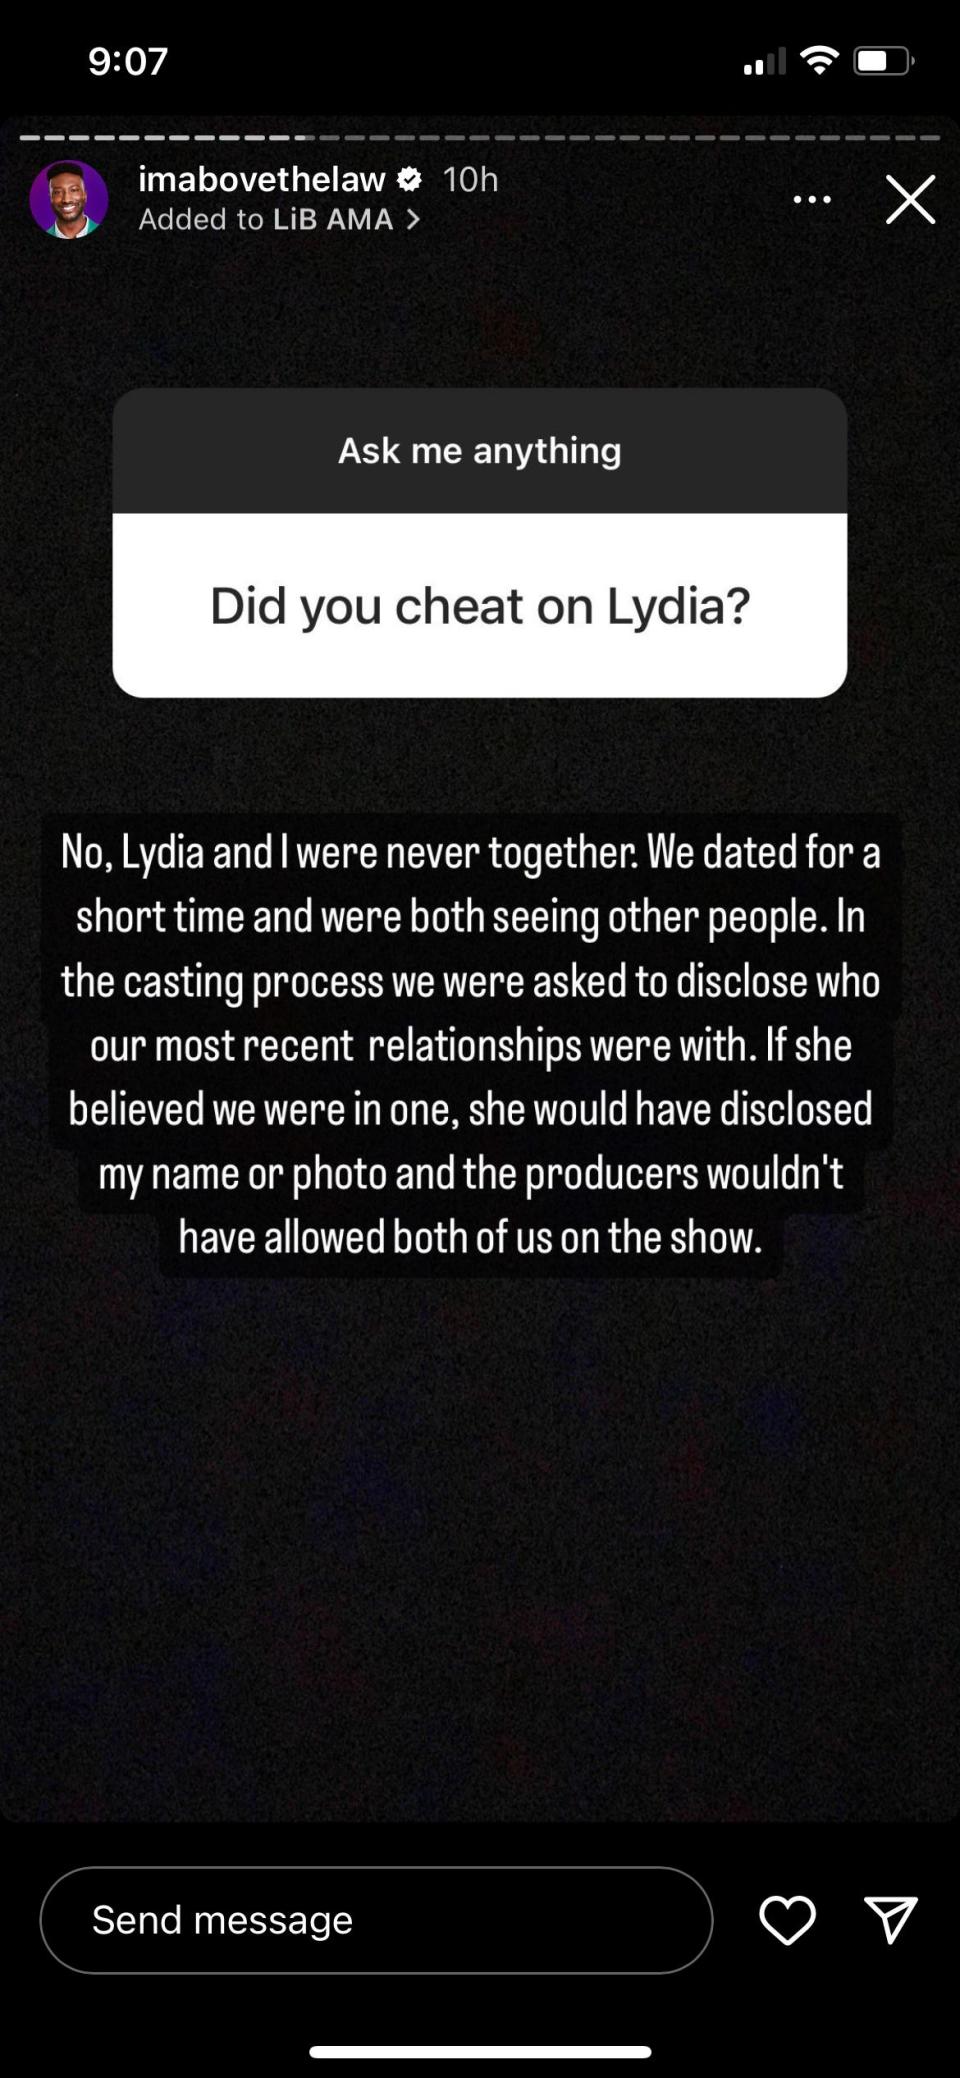 Uche Okoroha's Instagram Story about him and ex Lydia Velez Gonzalez being cast on "Love Is Blind."